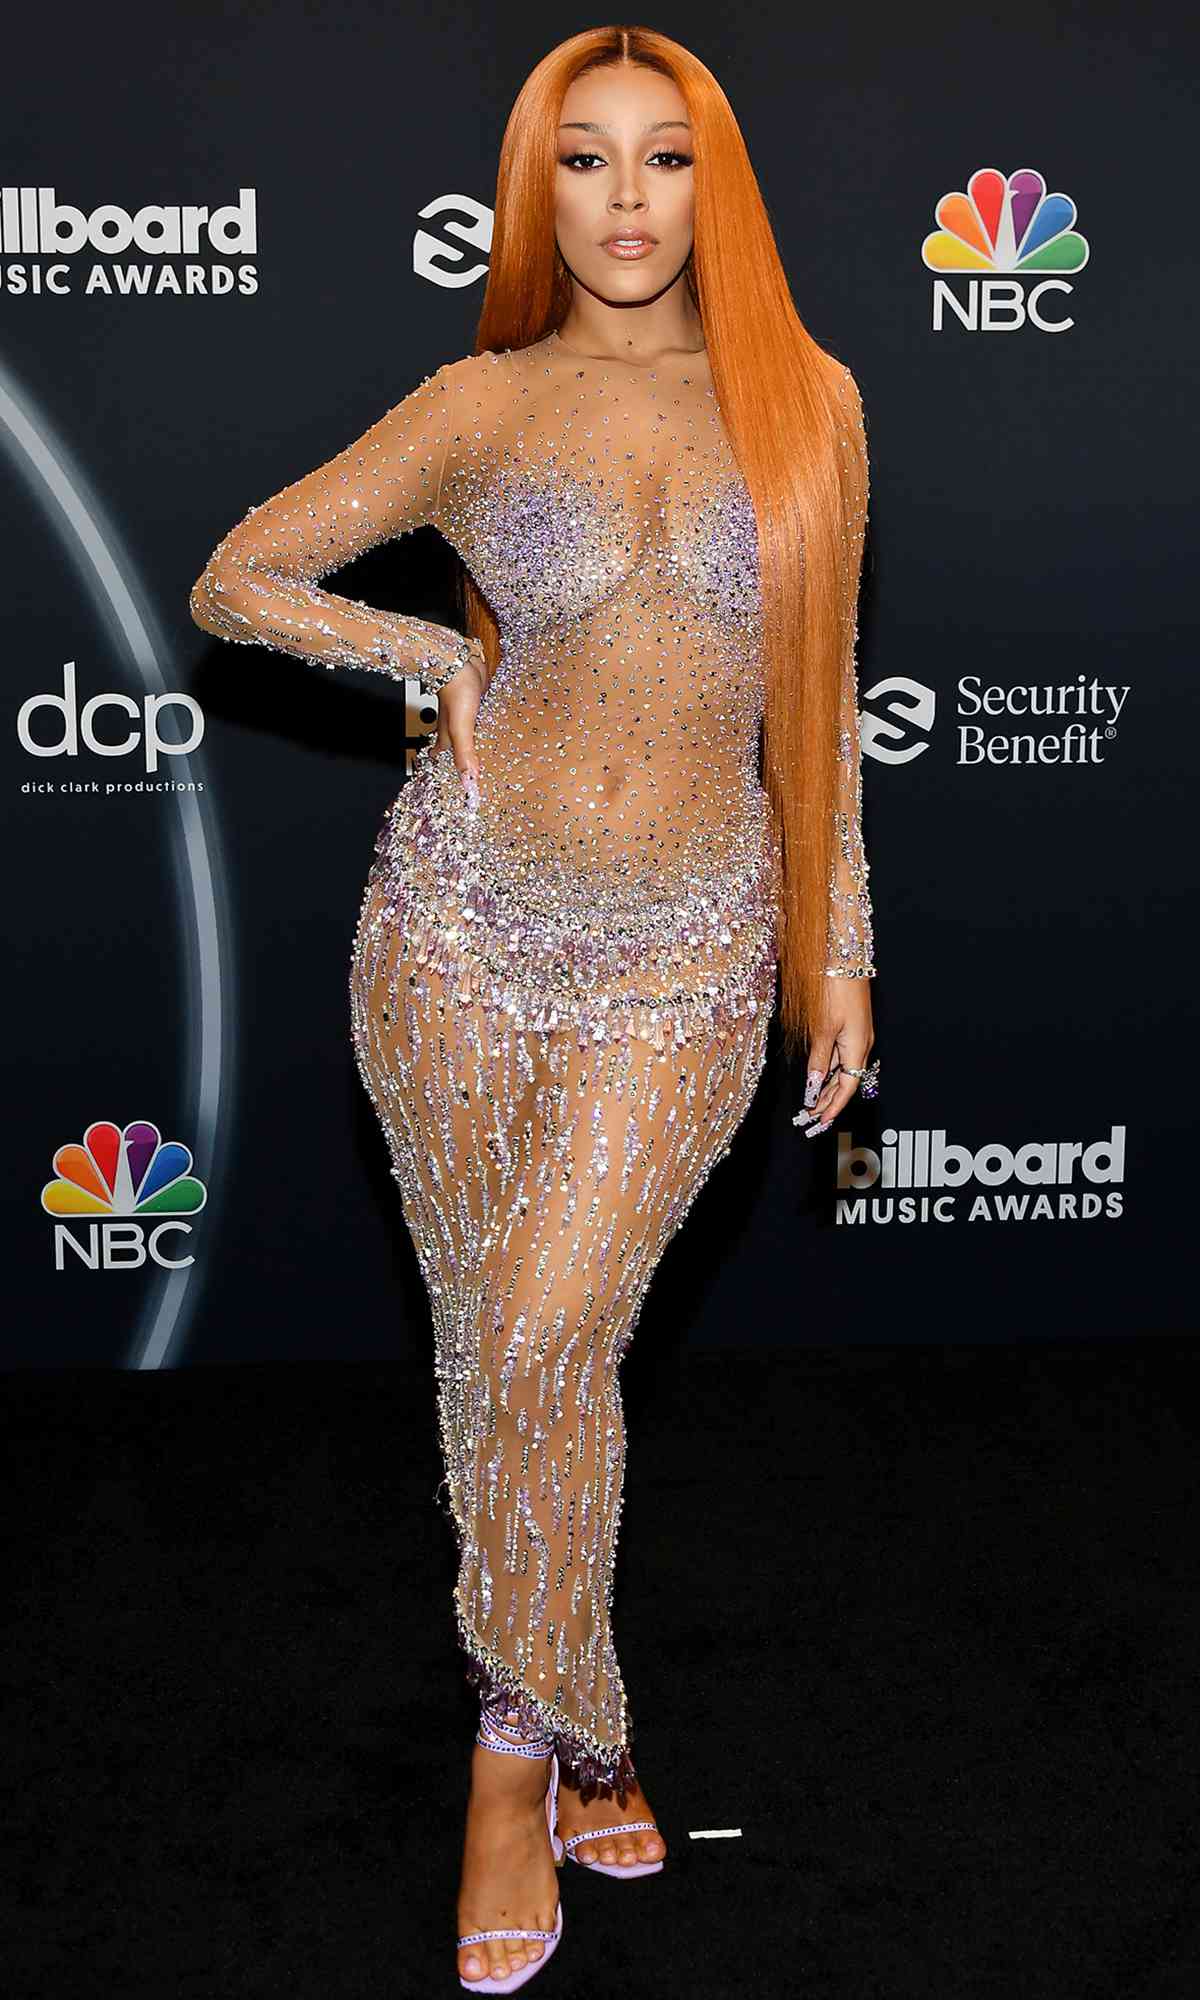 Doja Cat poses backstage at the 2020 Billboard Music Awards, broadcast on October 14, 2020 at the Dolby Theatre in Los Angeles, CA